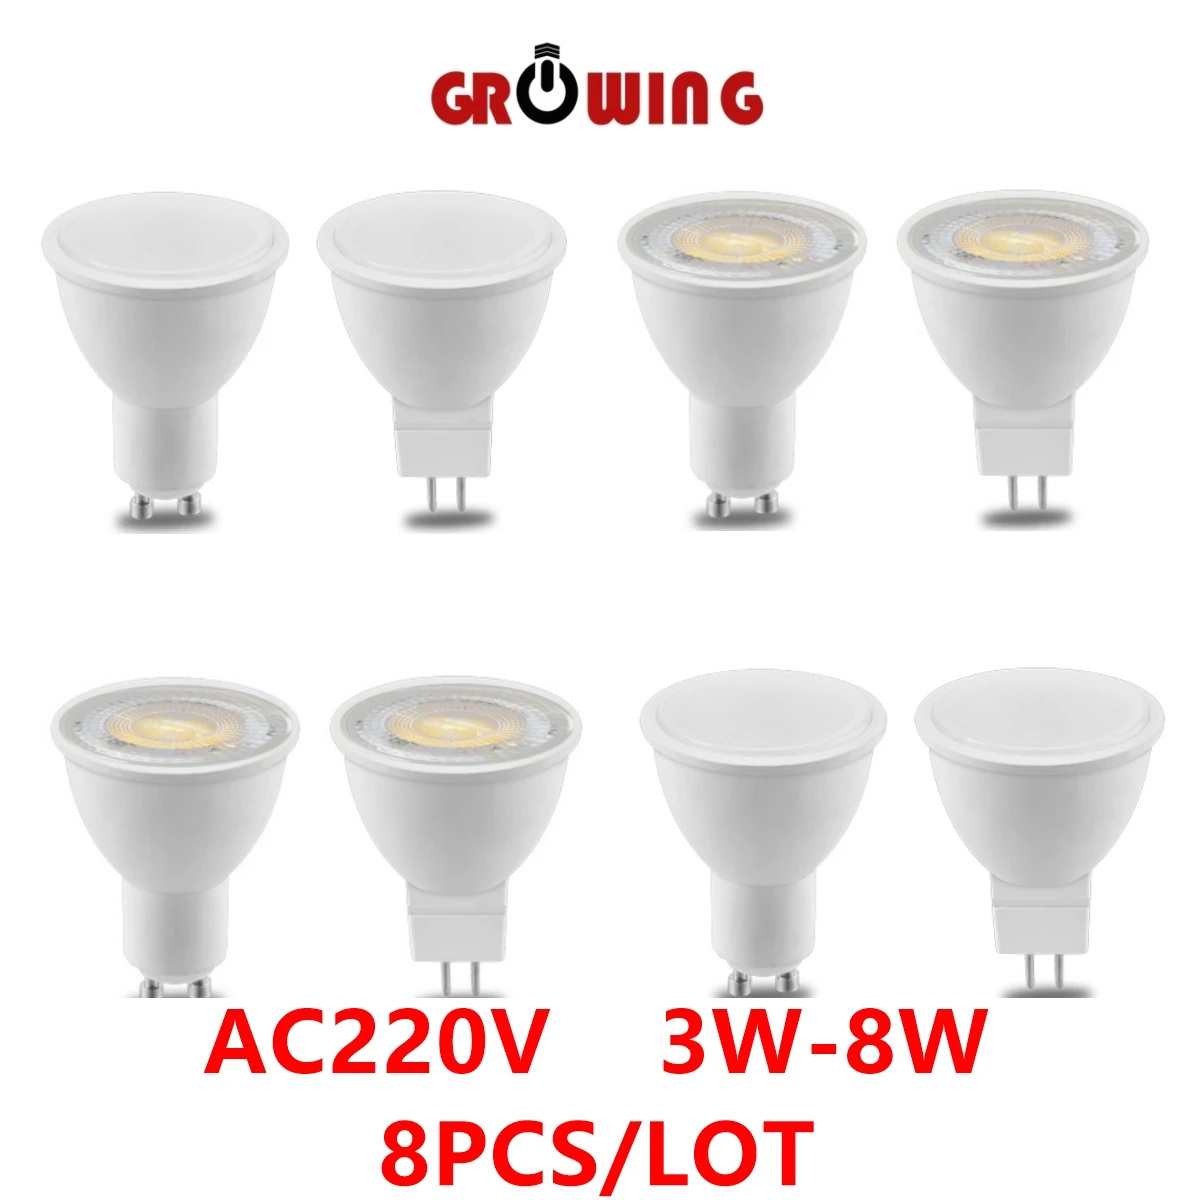 

8PCS MR16 GU5.3 LED Spotlight GU10 3W -8W AC220V 3000K/4000K/6000K Beam Angle 38 120 Degree for home indoor Light Bulb for Table